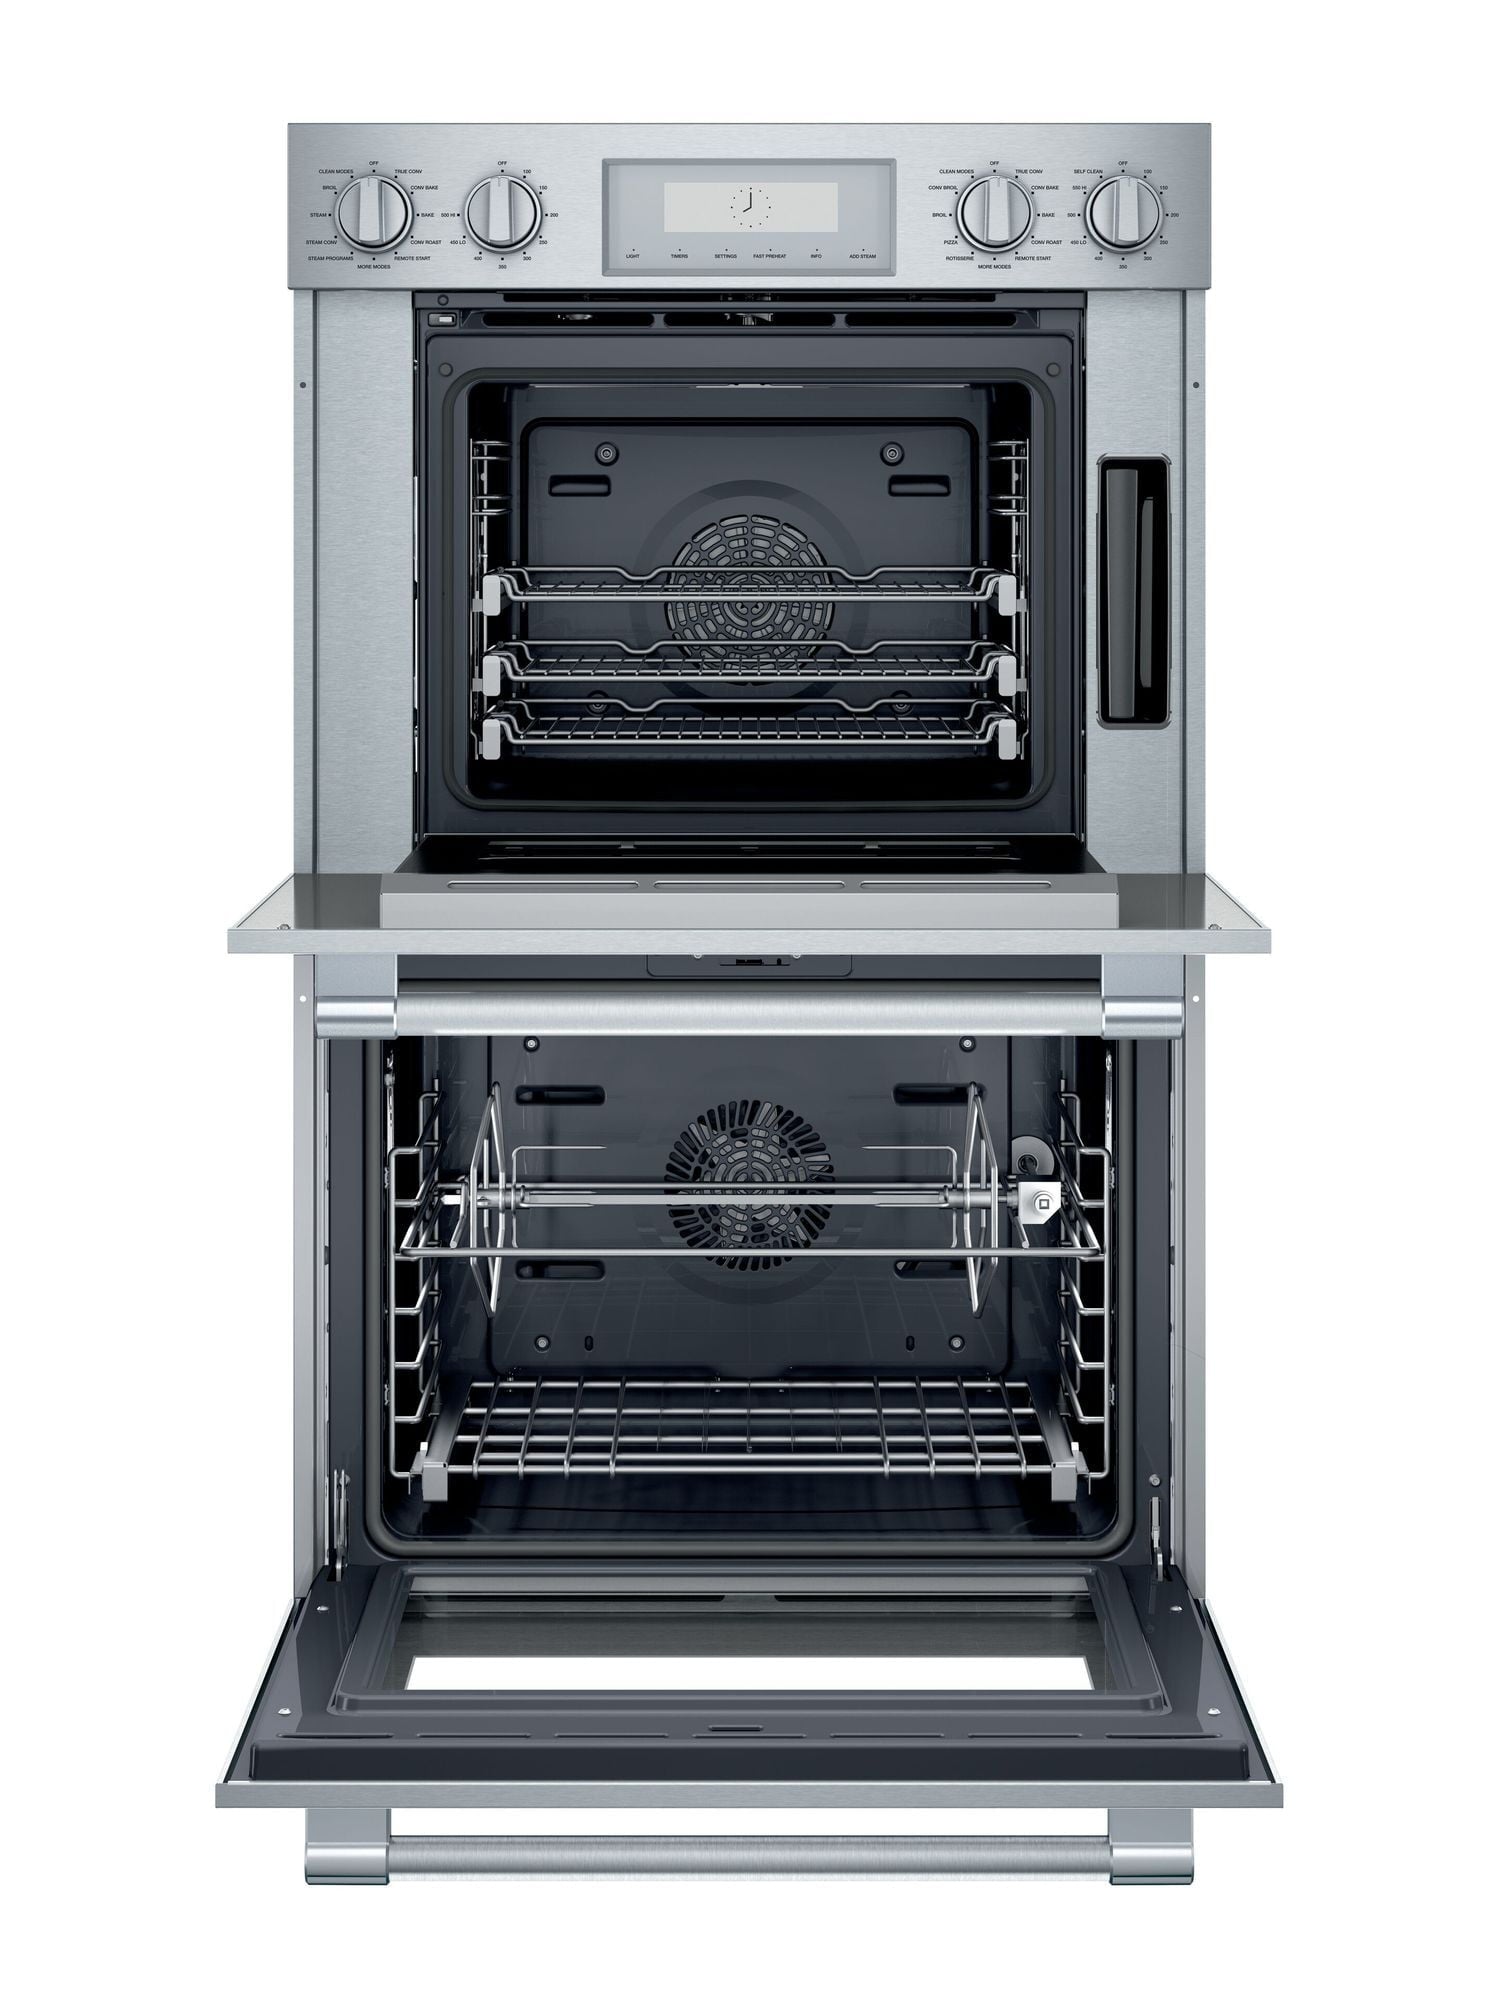 Thermador PODS302W 30-Inch Professional Double Steam Oven